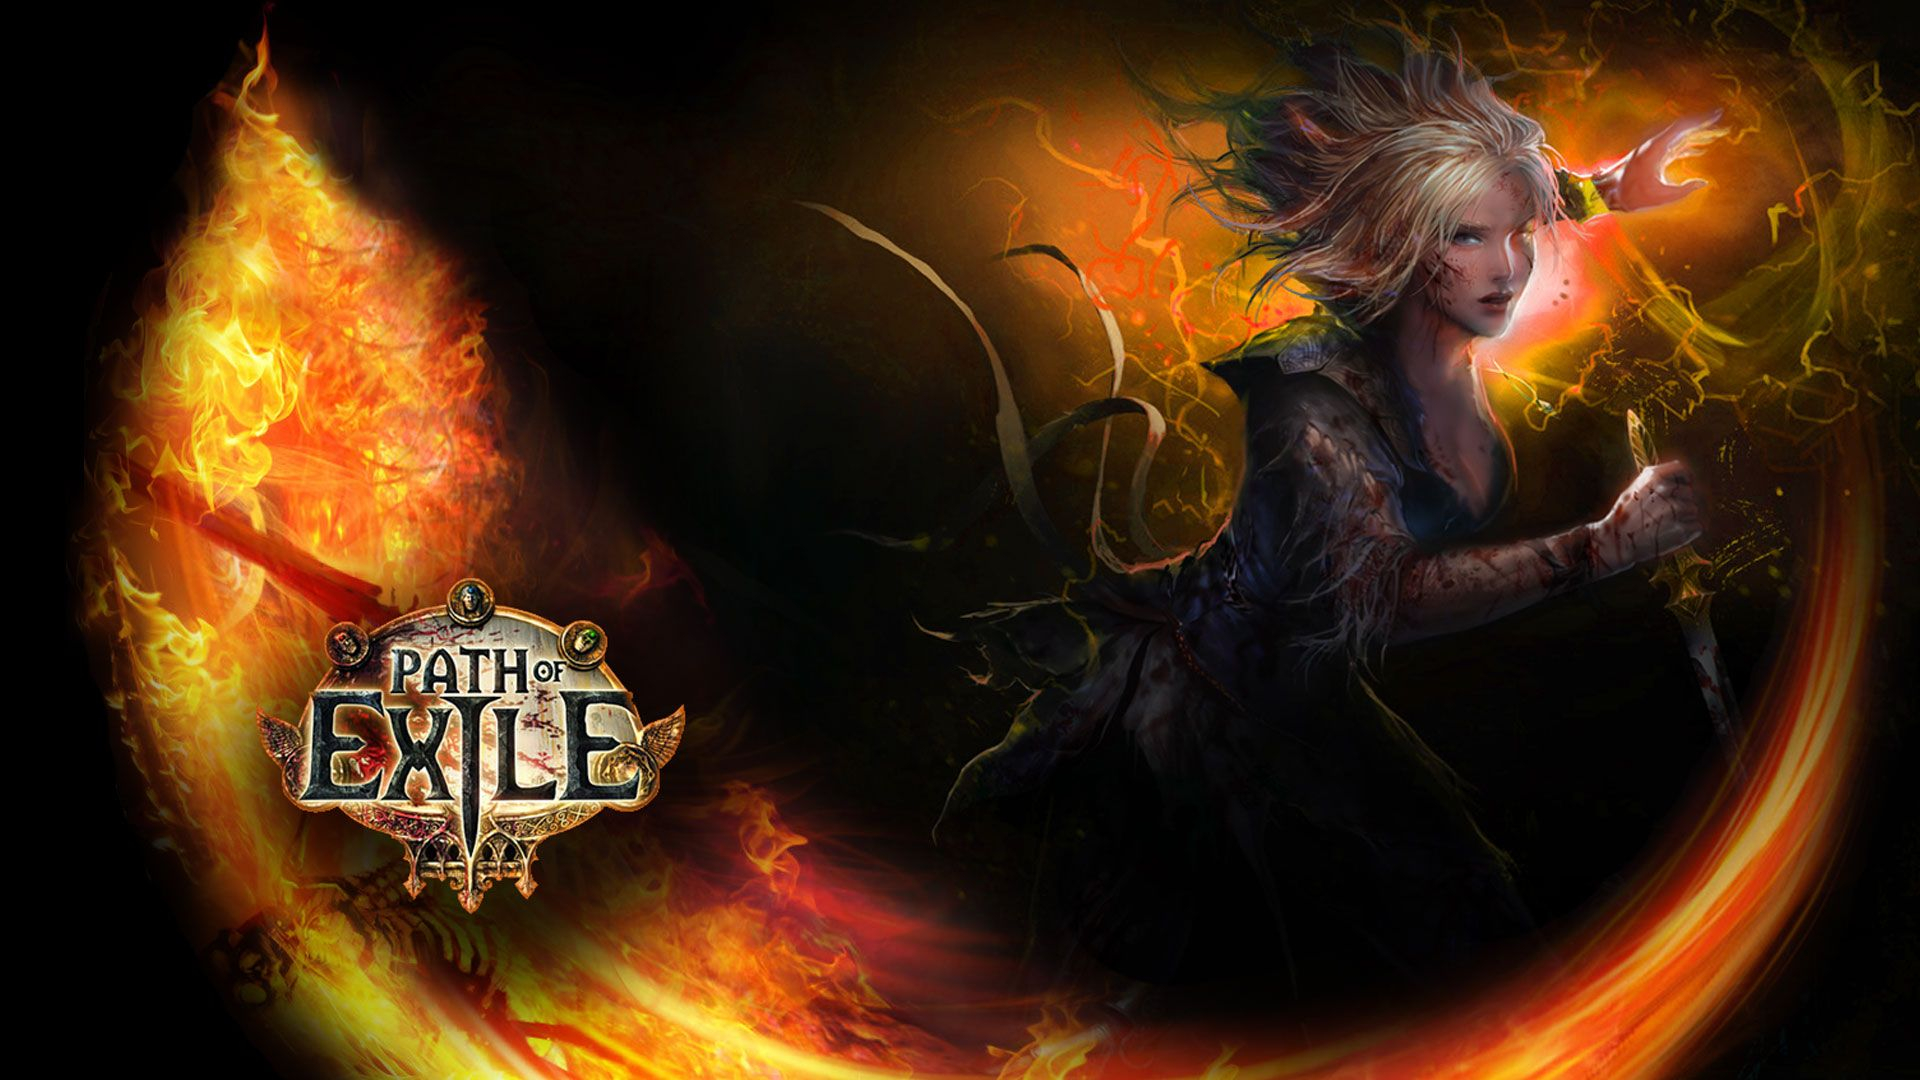 1920x1080 Path Of Exile Game Poster Wallpapers